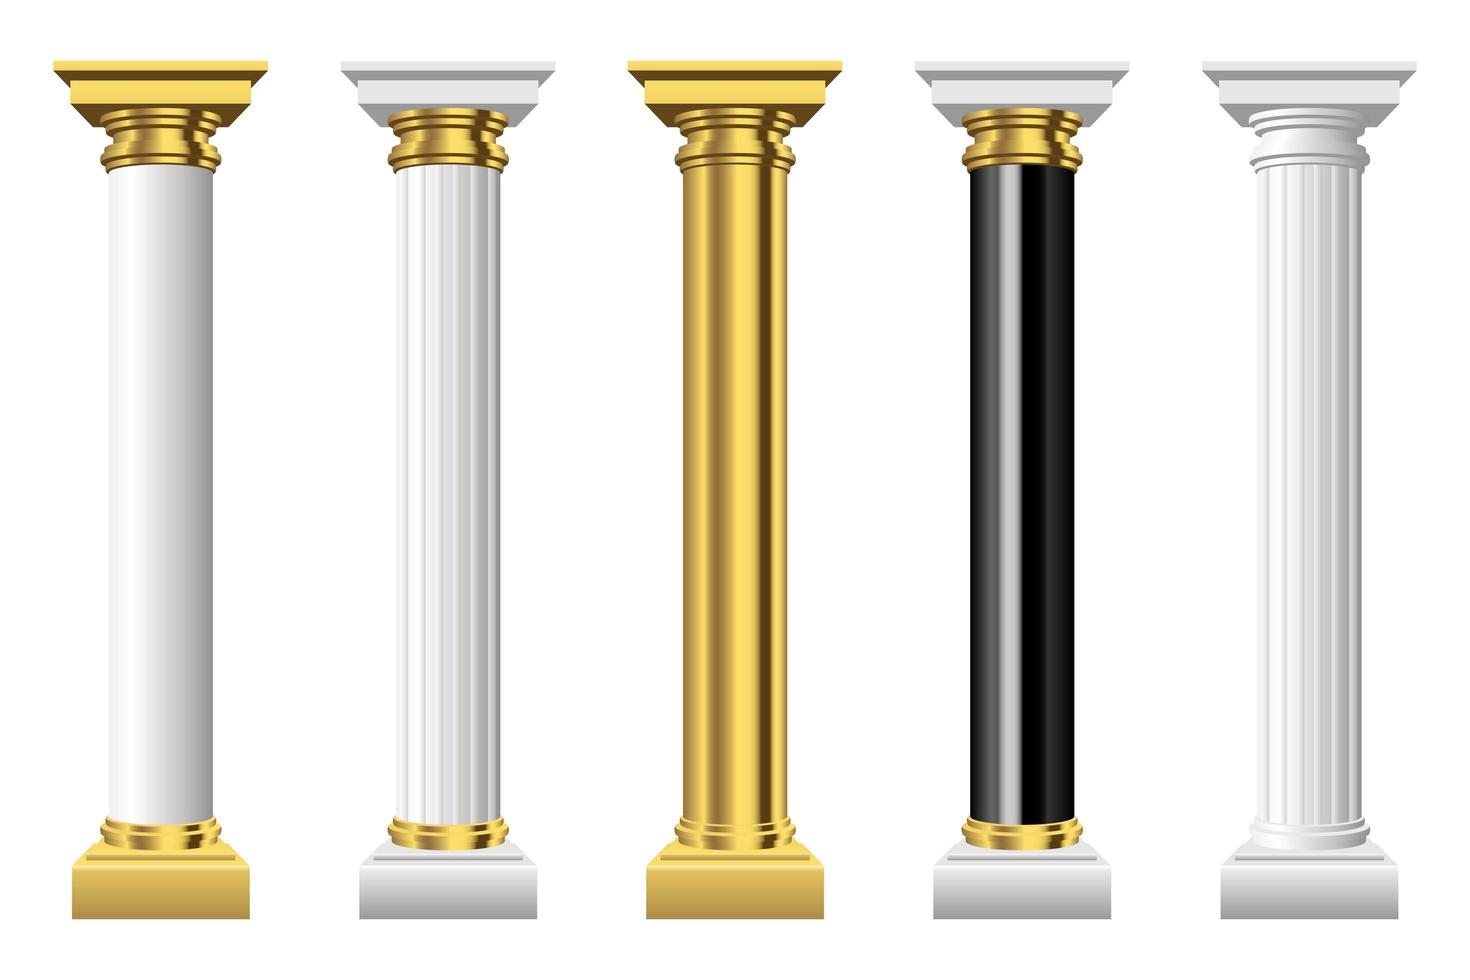 Antique columns vector design illustration isolated on white background